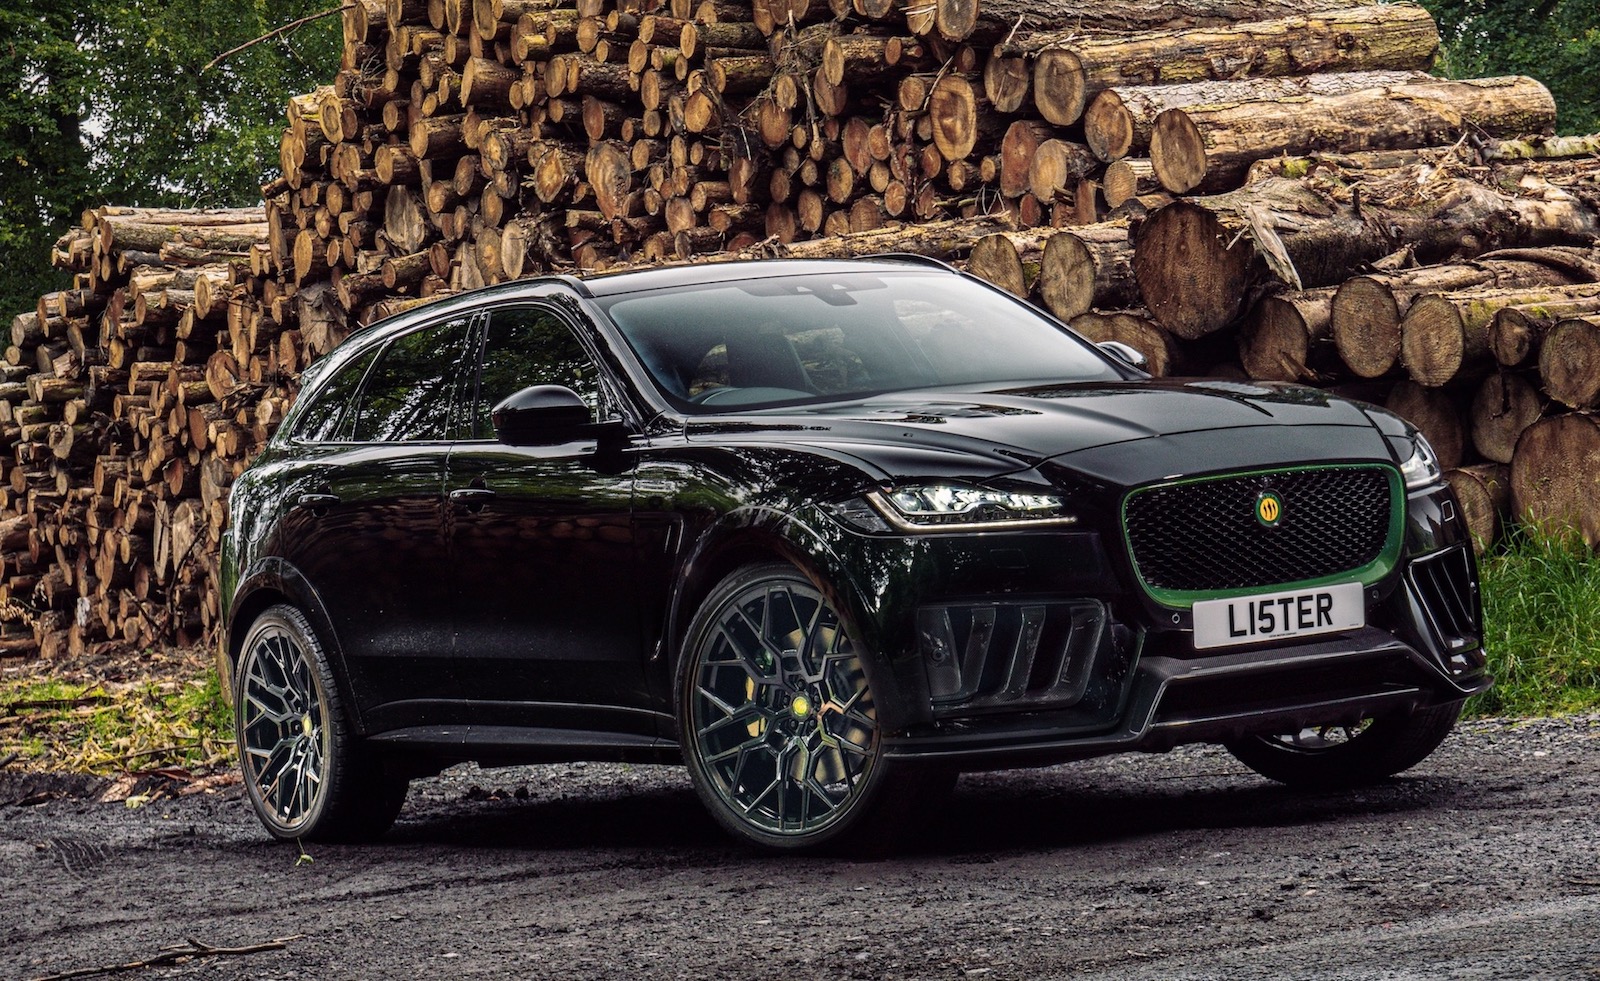 2020 Lister Stealth debuts as Britain’s most powerful SUV